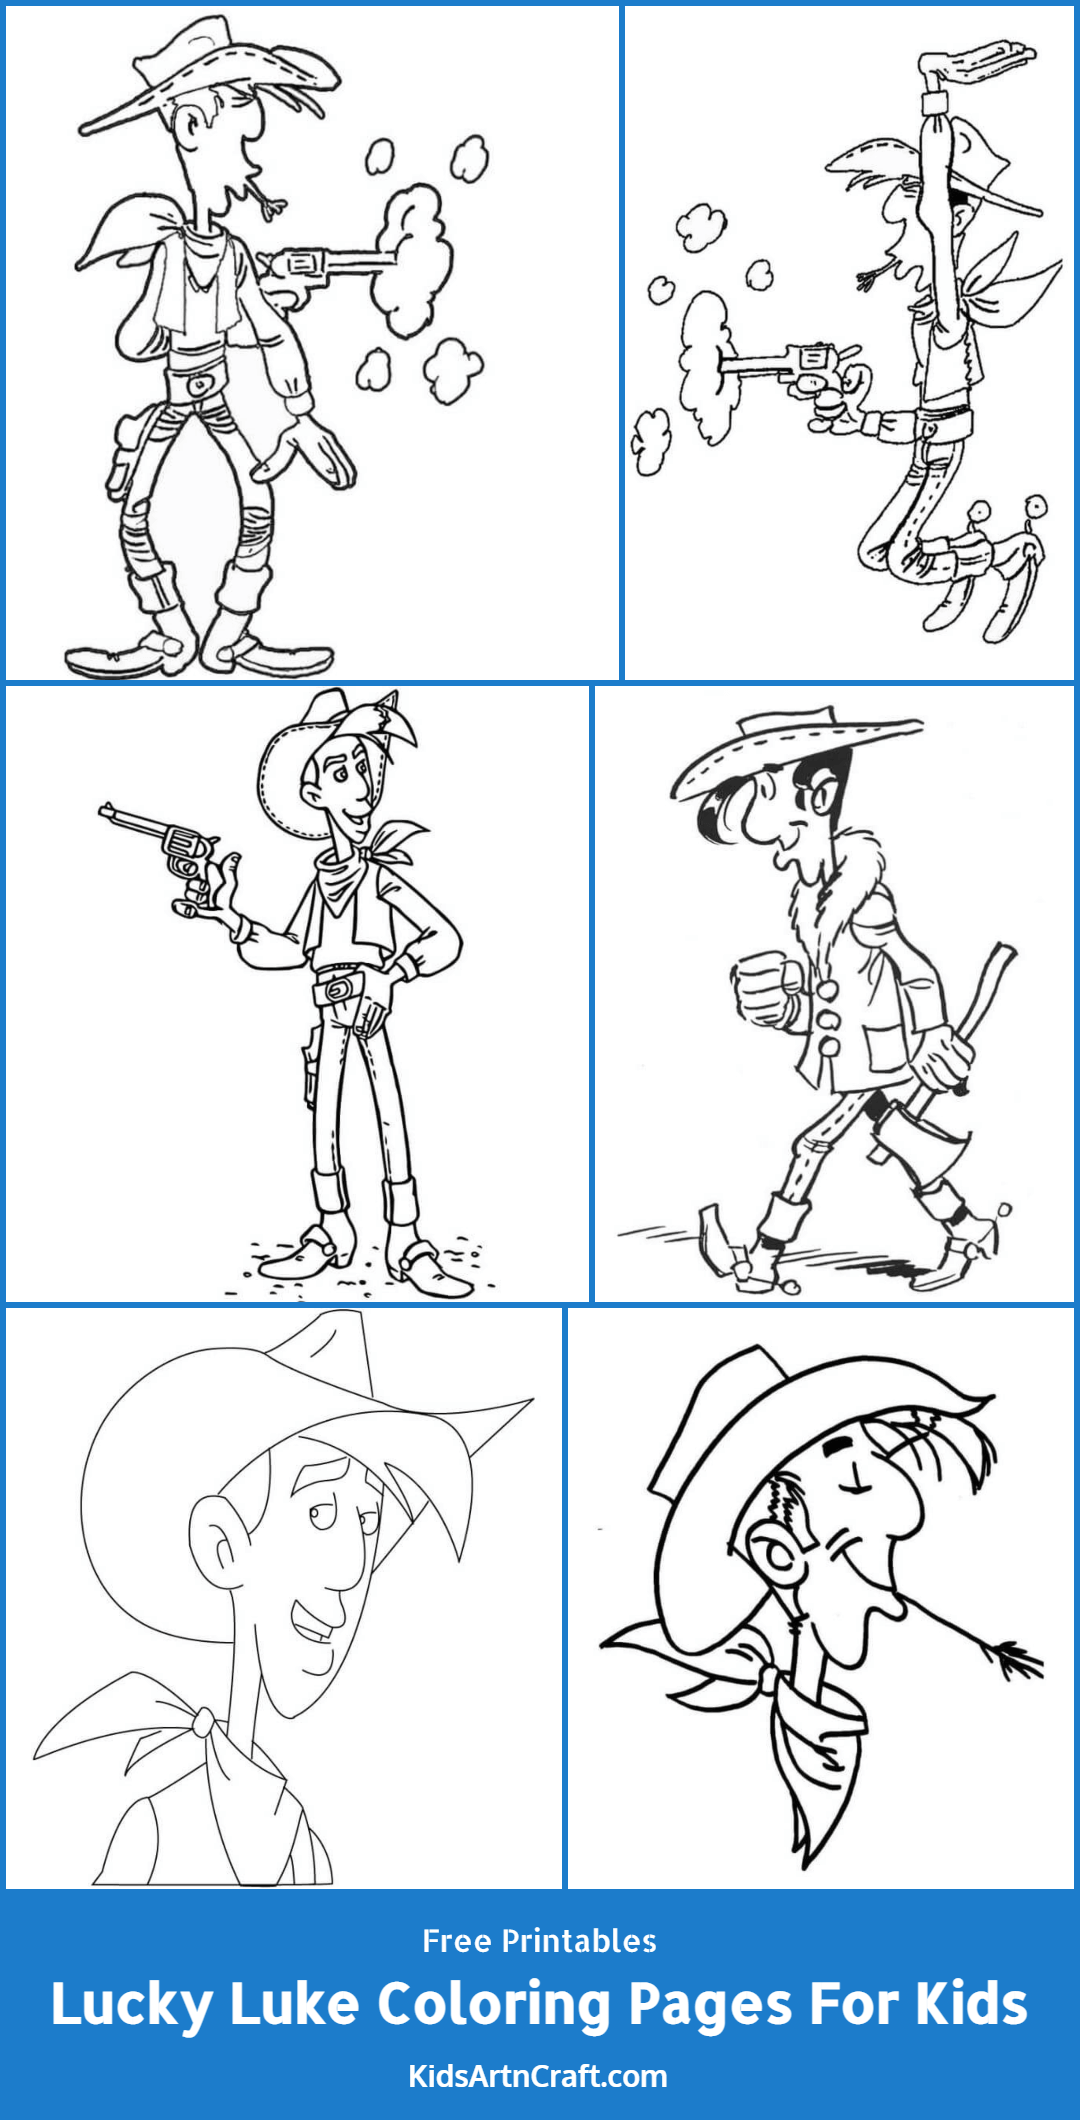 Lucky Luke Coloring Pages For Kids – Free Printables